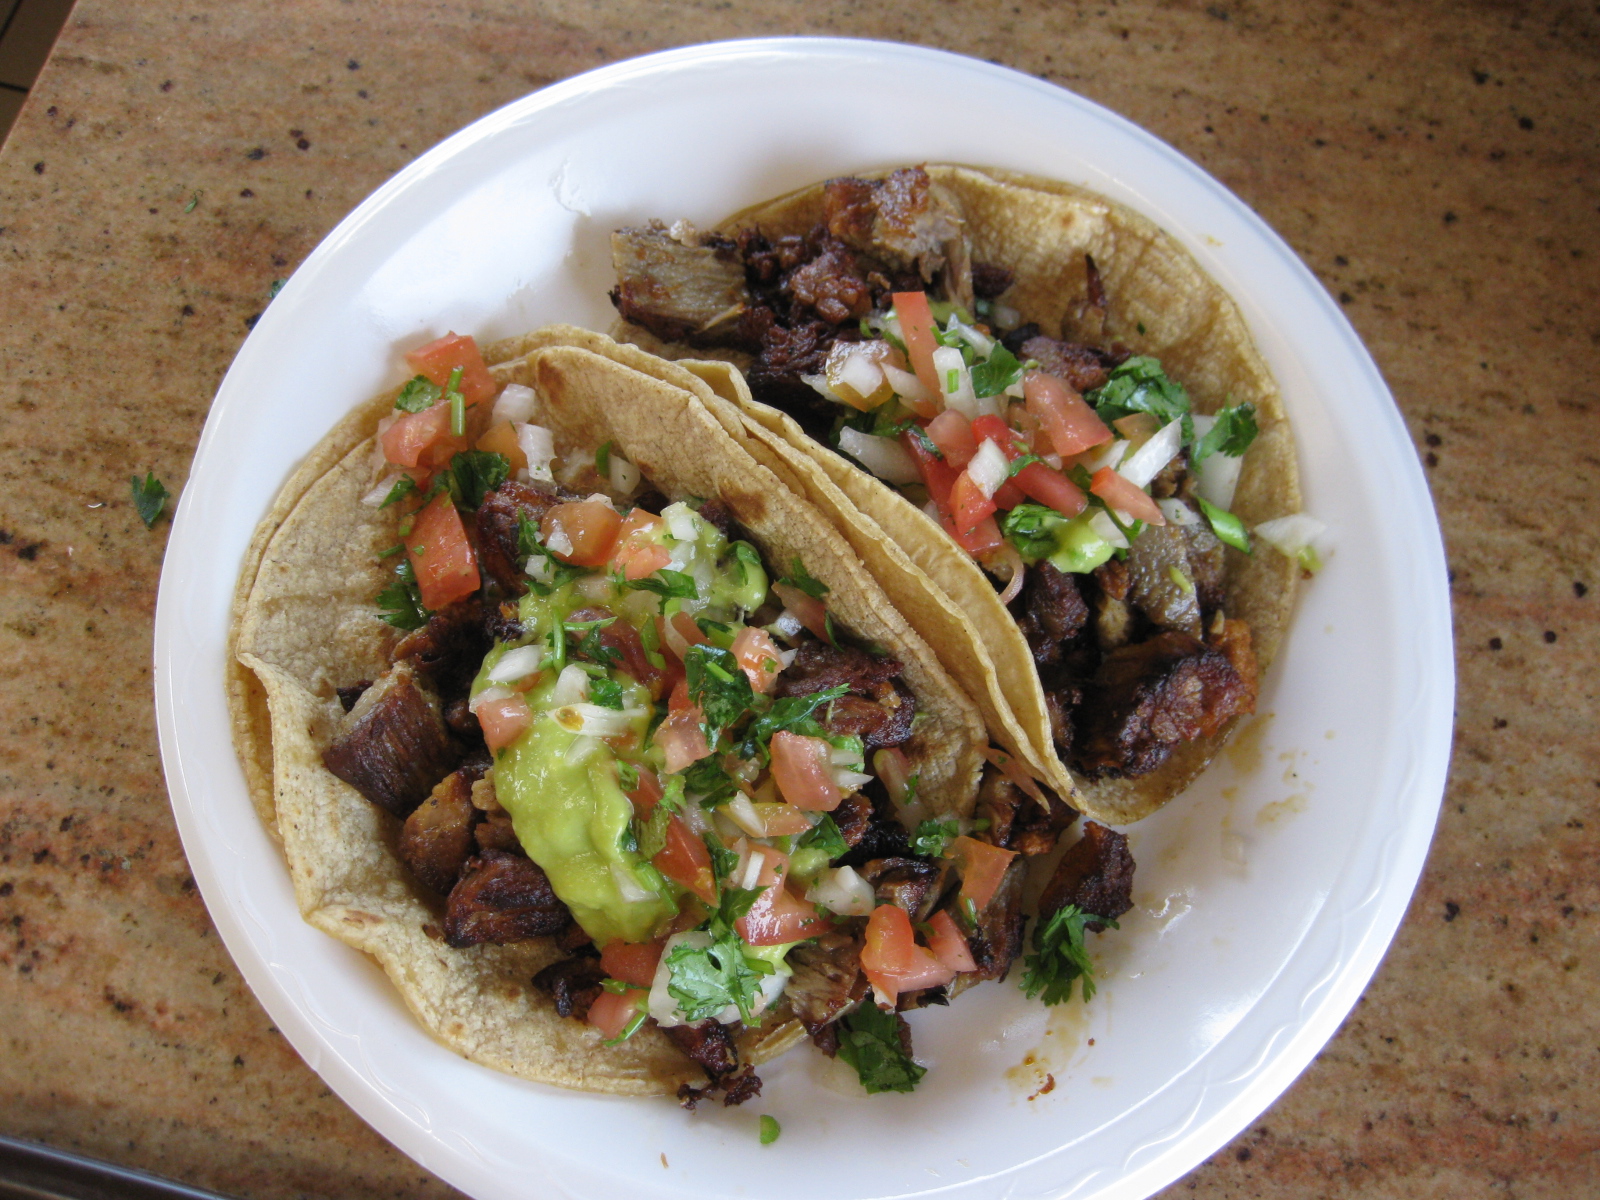 two tacos sit on a plate with salsa